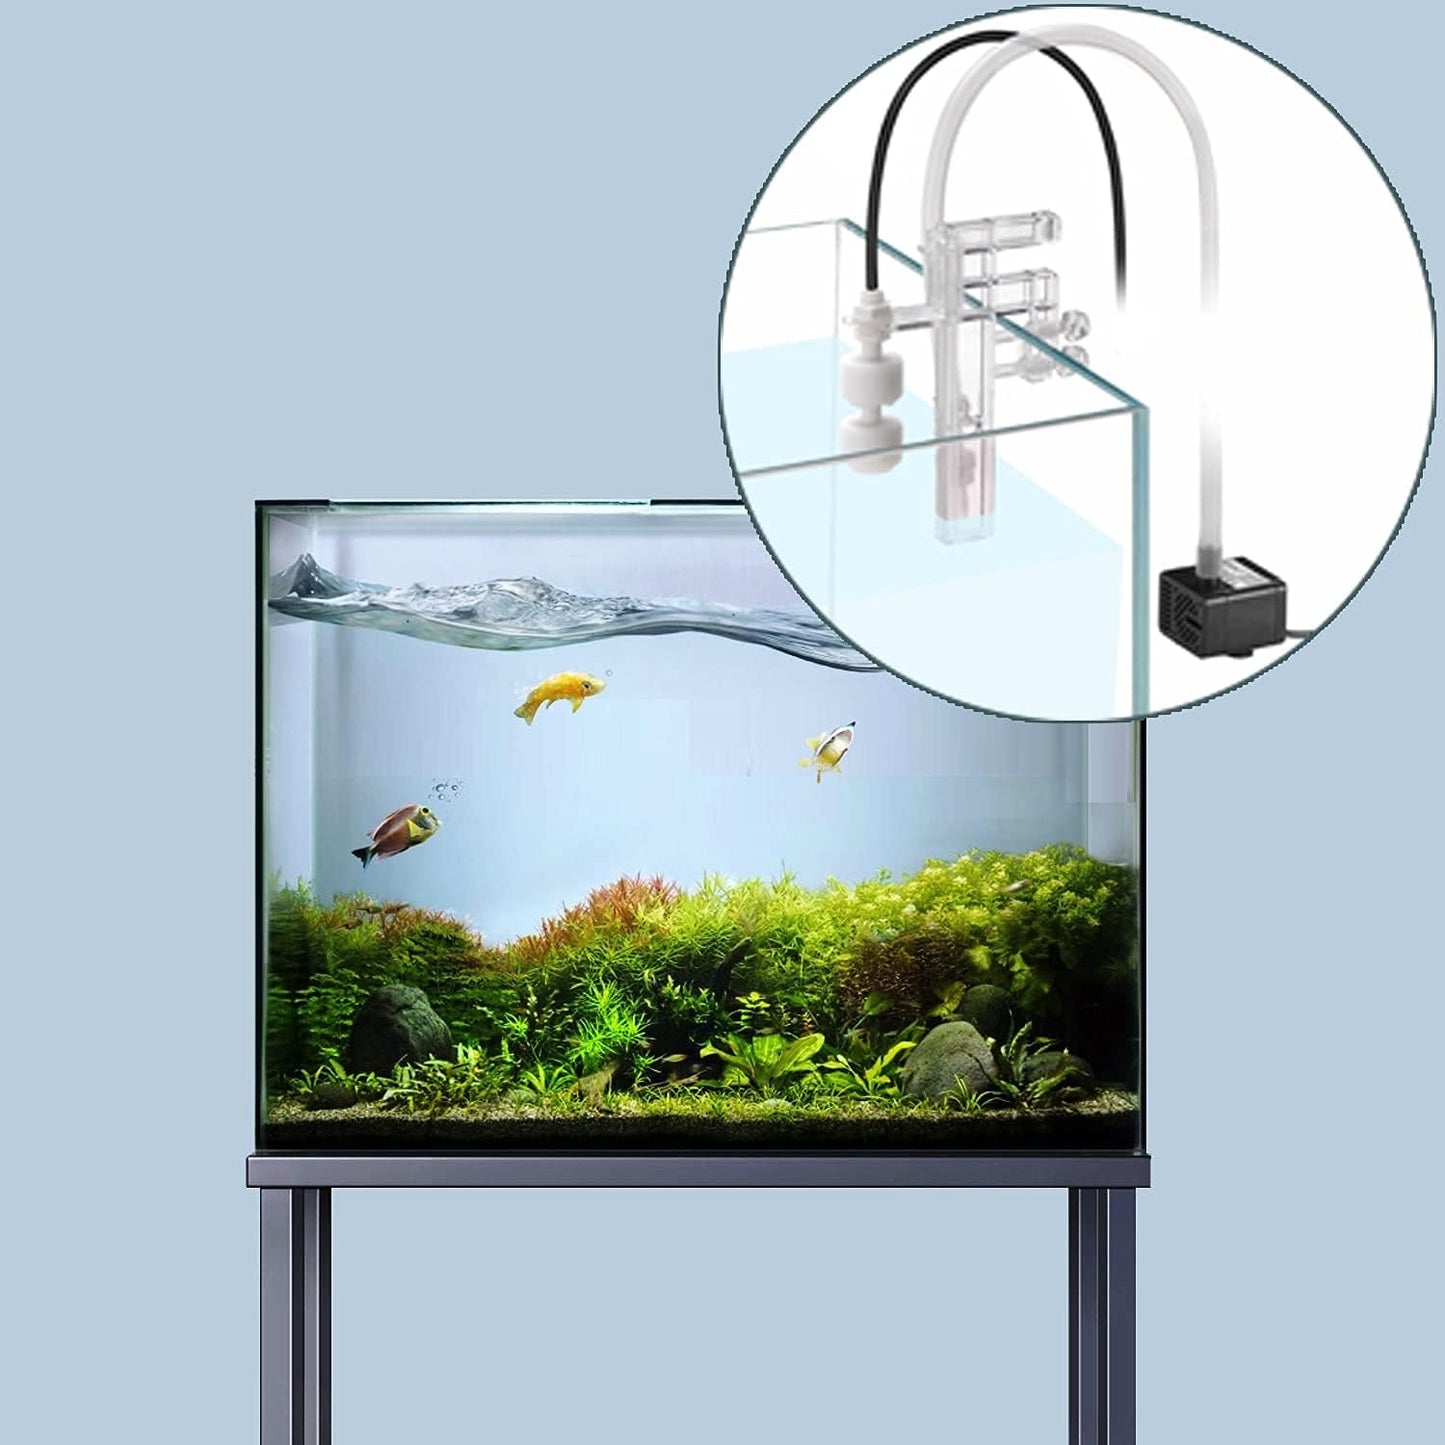 ATO System, Smart Auto Top off System, Fish Tank Sump Water Filler Refiller, Automatic ATO System for Aquarium with Pump,Water Replenishment System, Smart ATO System for Fish Tank